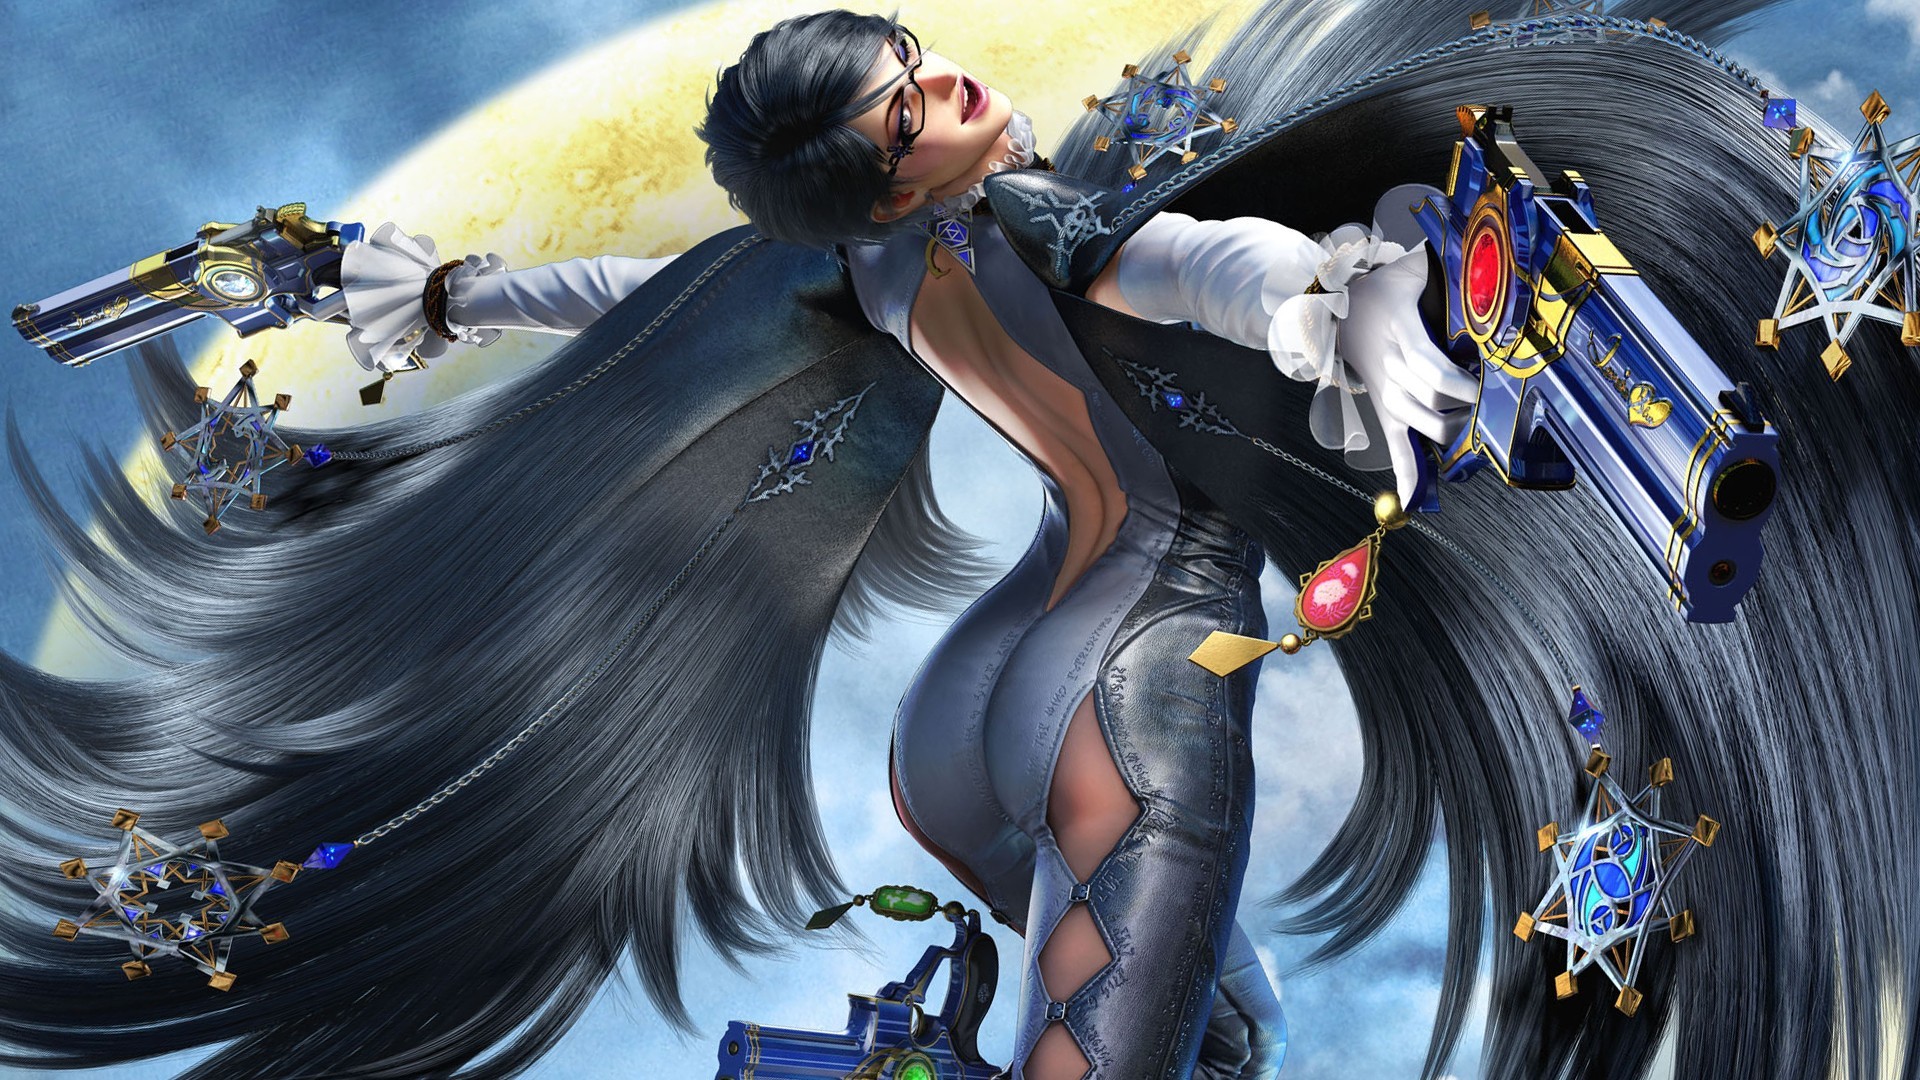 Nice Images Collection: Bayonetta Desktop Wallpapers